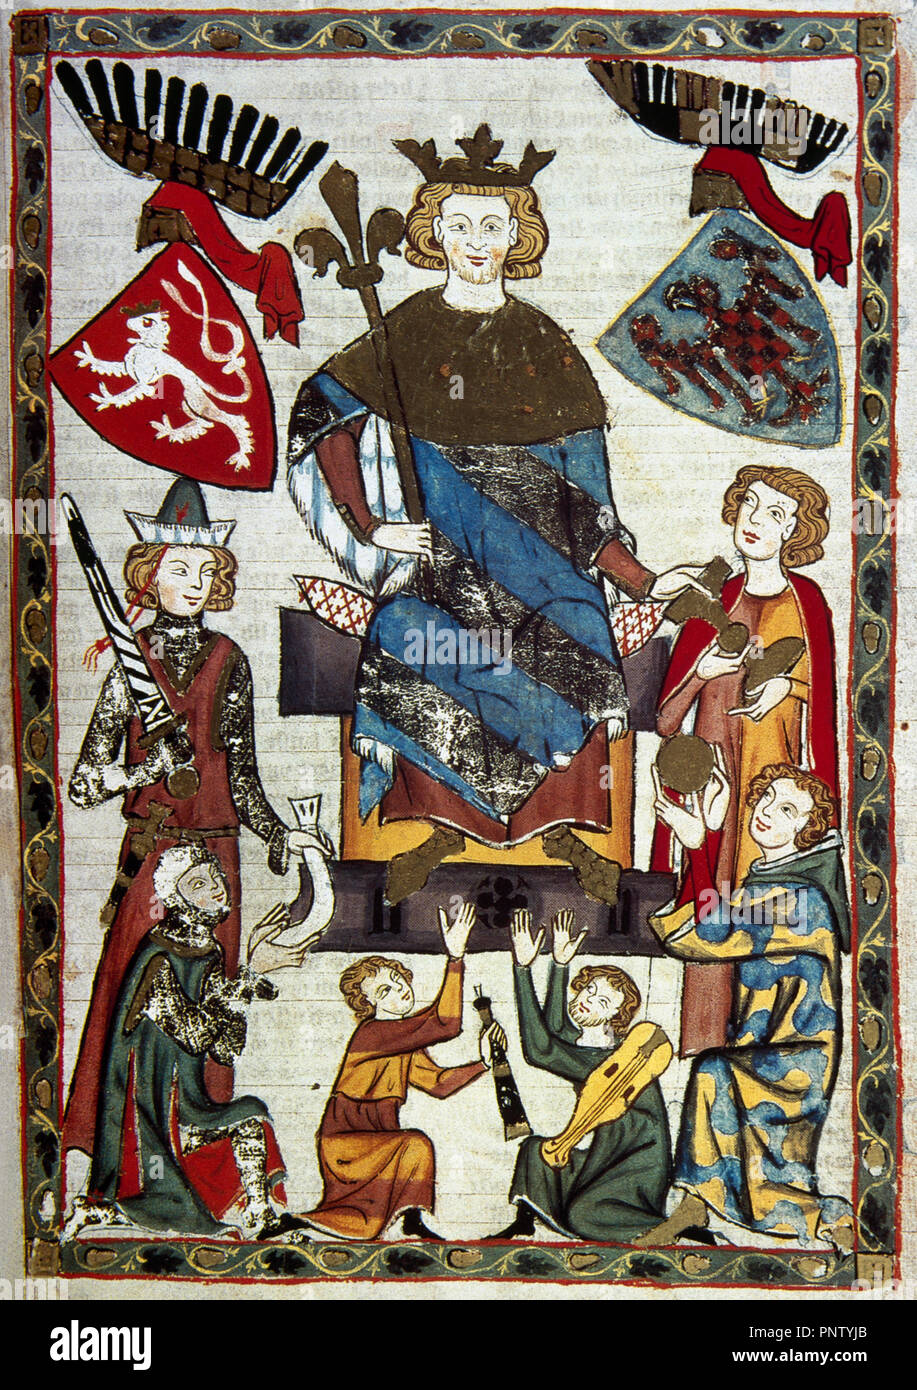 Wenceslaus II , king of Bohemia (1278-1305) and King of Poland (1300-1305). The Emperor flanked by coats of arms of Bohemia and Moravia. Fol.10r. Miniature. Codex Manesse, 1304-1340. Produced in Zurich, for Manesse family. Middle High German Minnesang poetry. Heidelberg University, Germany. Stock Photo